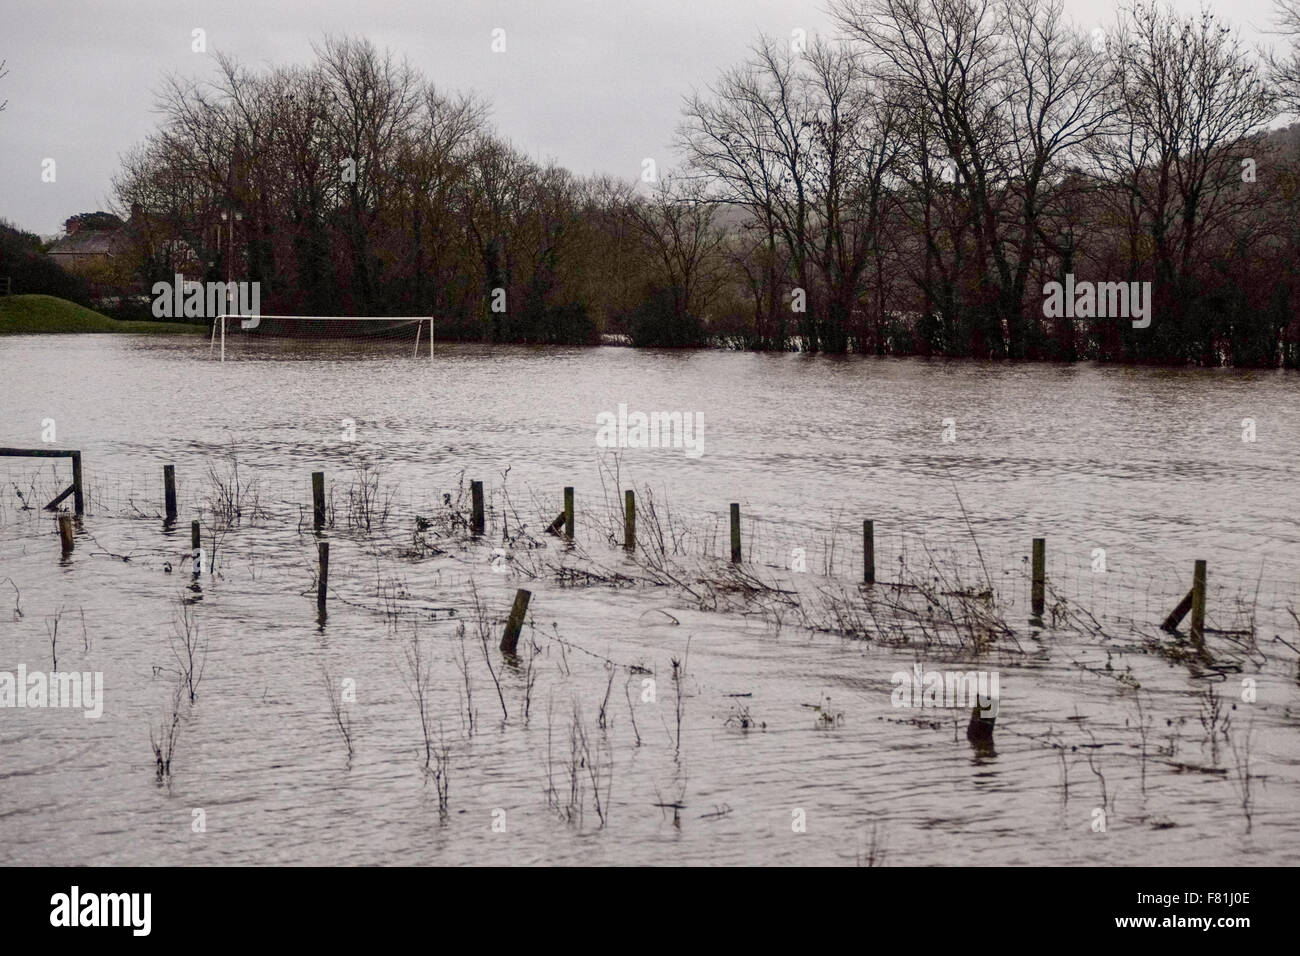 South Wales, UK. 4th December 2015.  Prolonged rain falling on saturated land has left low lying agricultural areas flooded. The river Towy bursts its banks flooding surrounding farmland near Carmarthen, south Wales, UK. A local playing field near Abergwili is submerged. Credit:  Algis Motuza/Alamy Live News Stock Photo